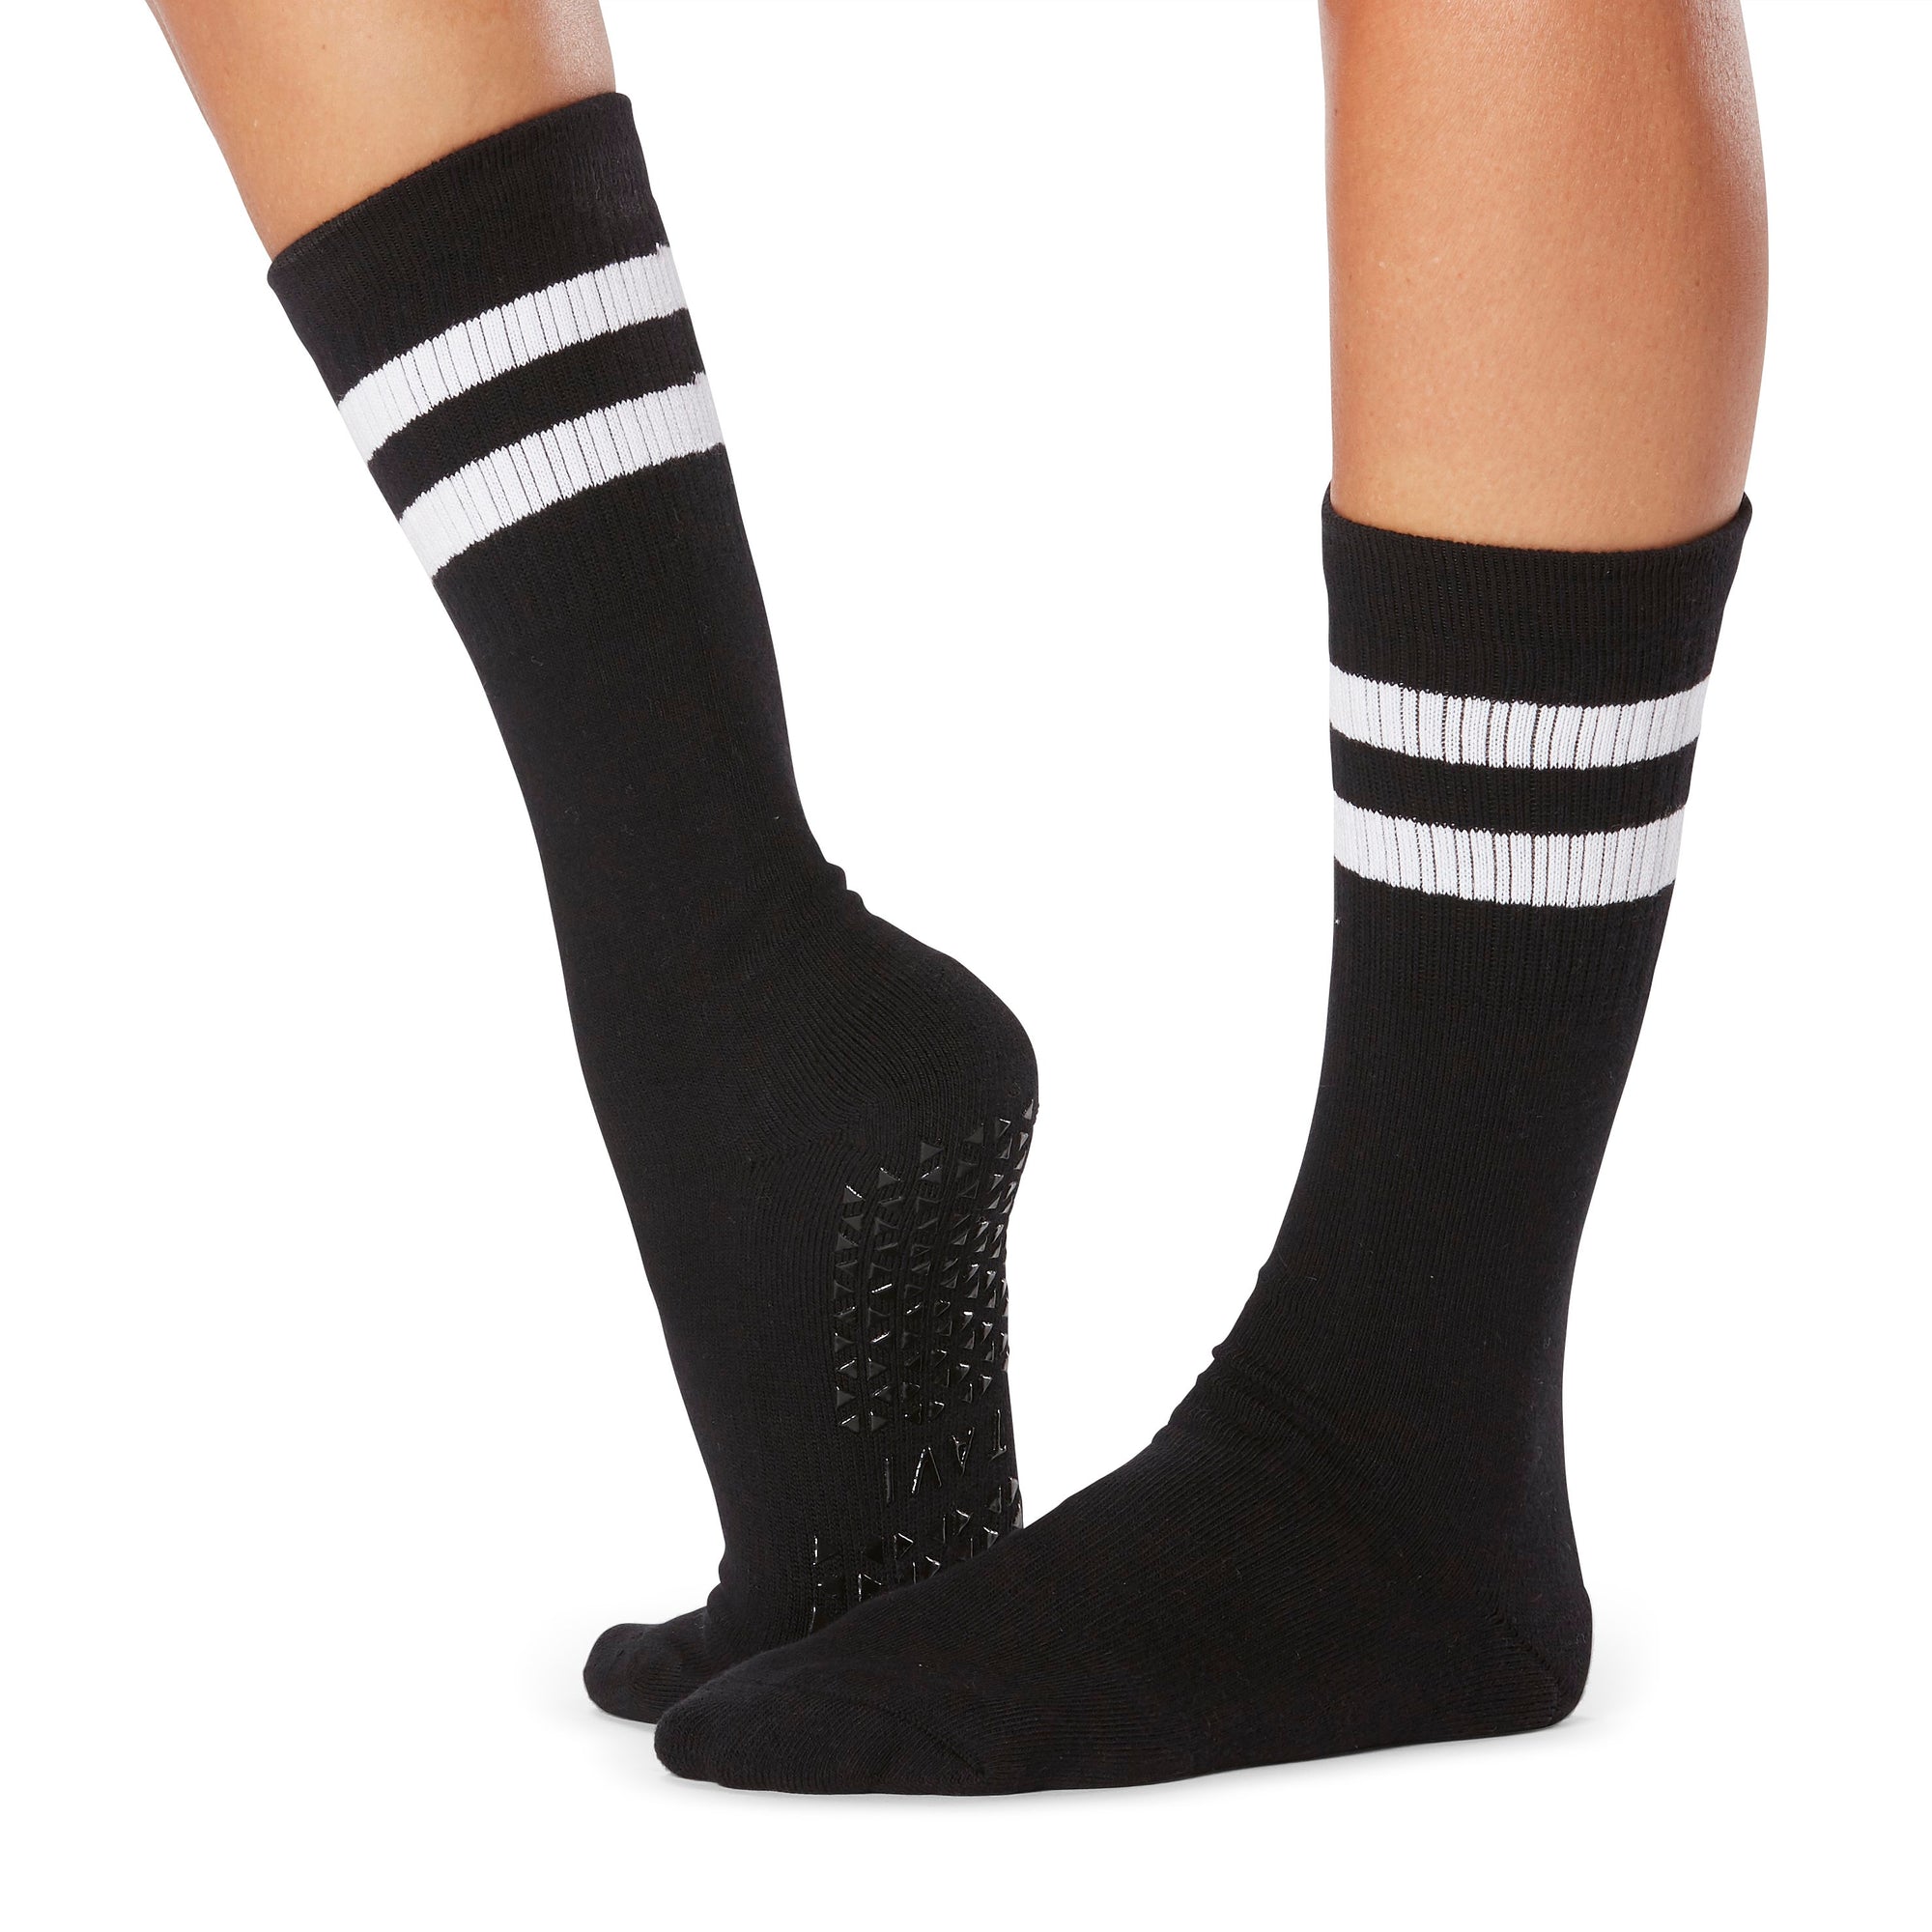 ToeSox - Low Rise Grip Socks - FALL 2020 - T8 Fitness - Asia Yoga, Pilates,  Rehab, Fitness Products